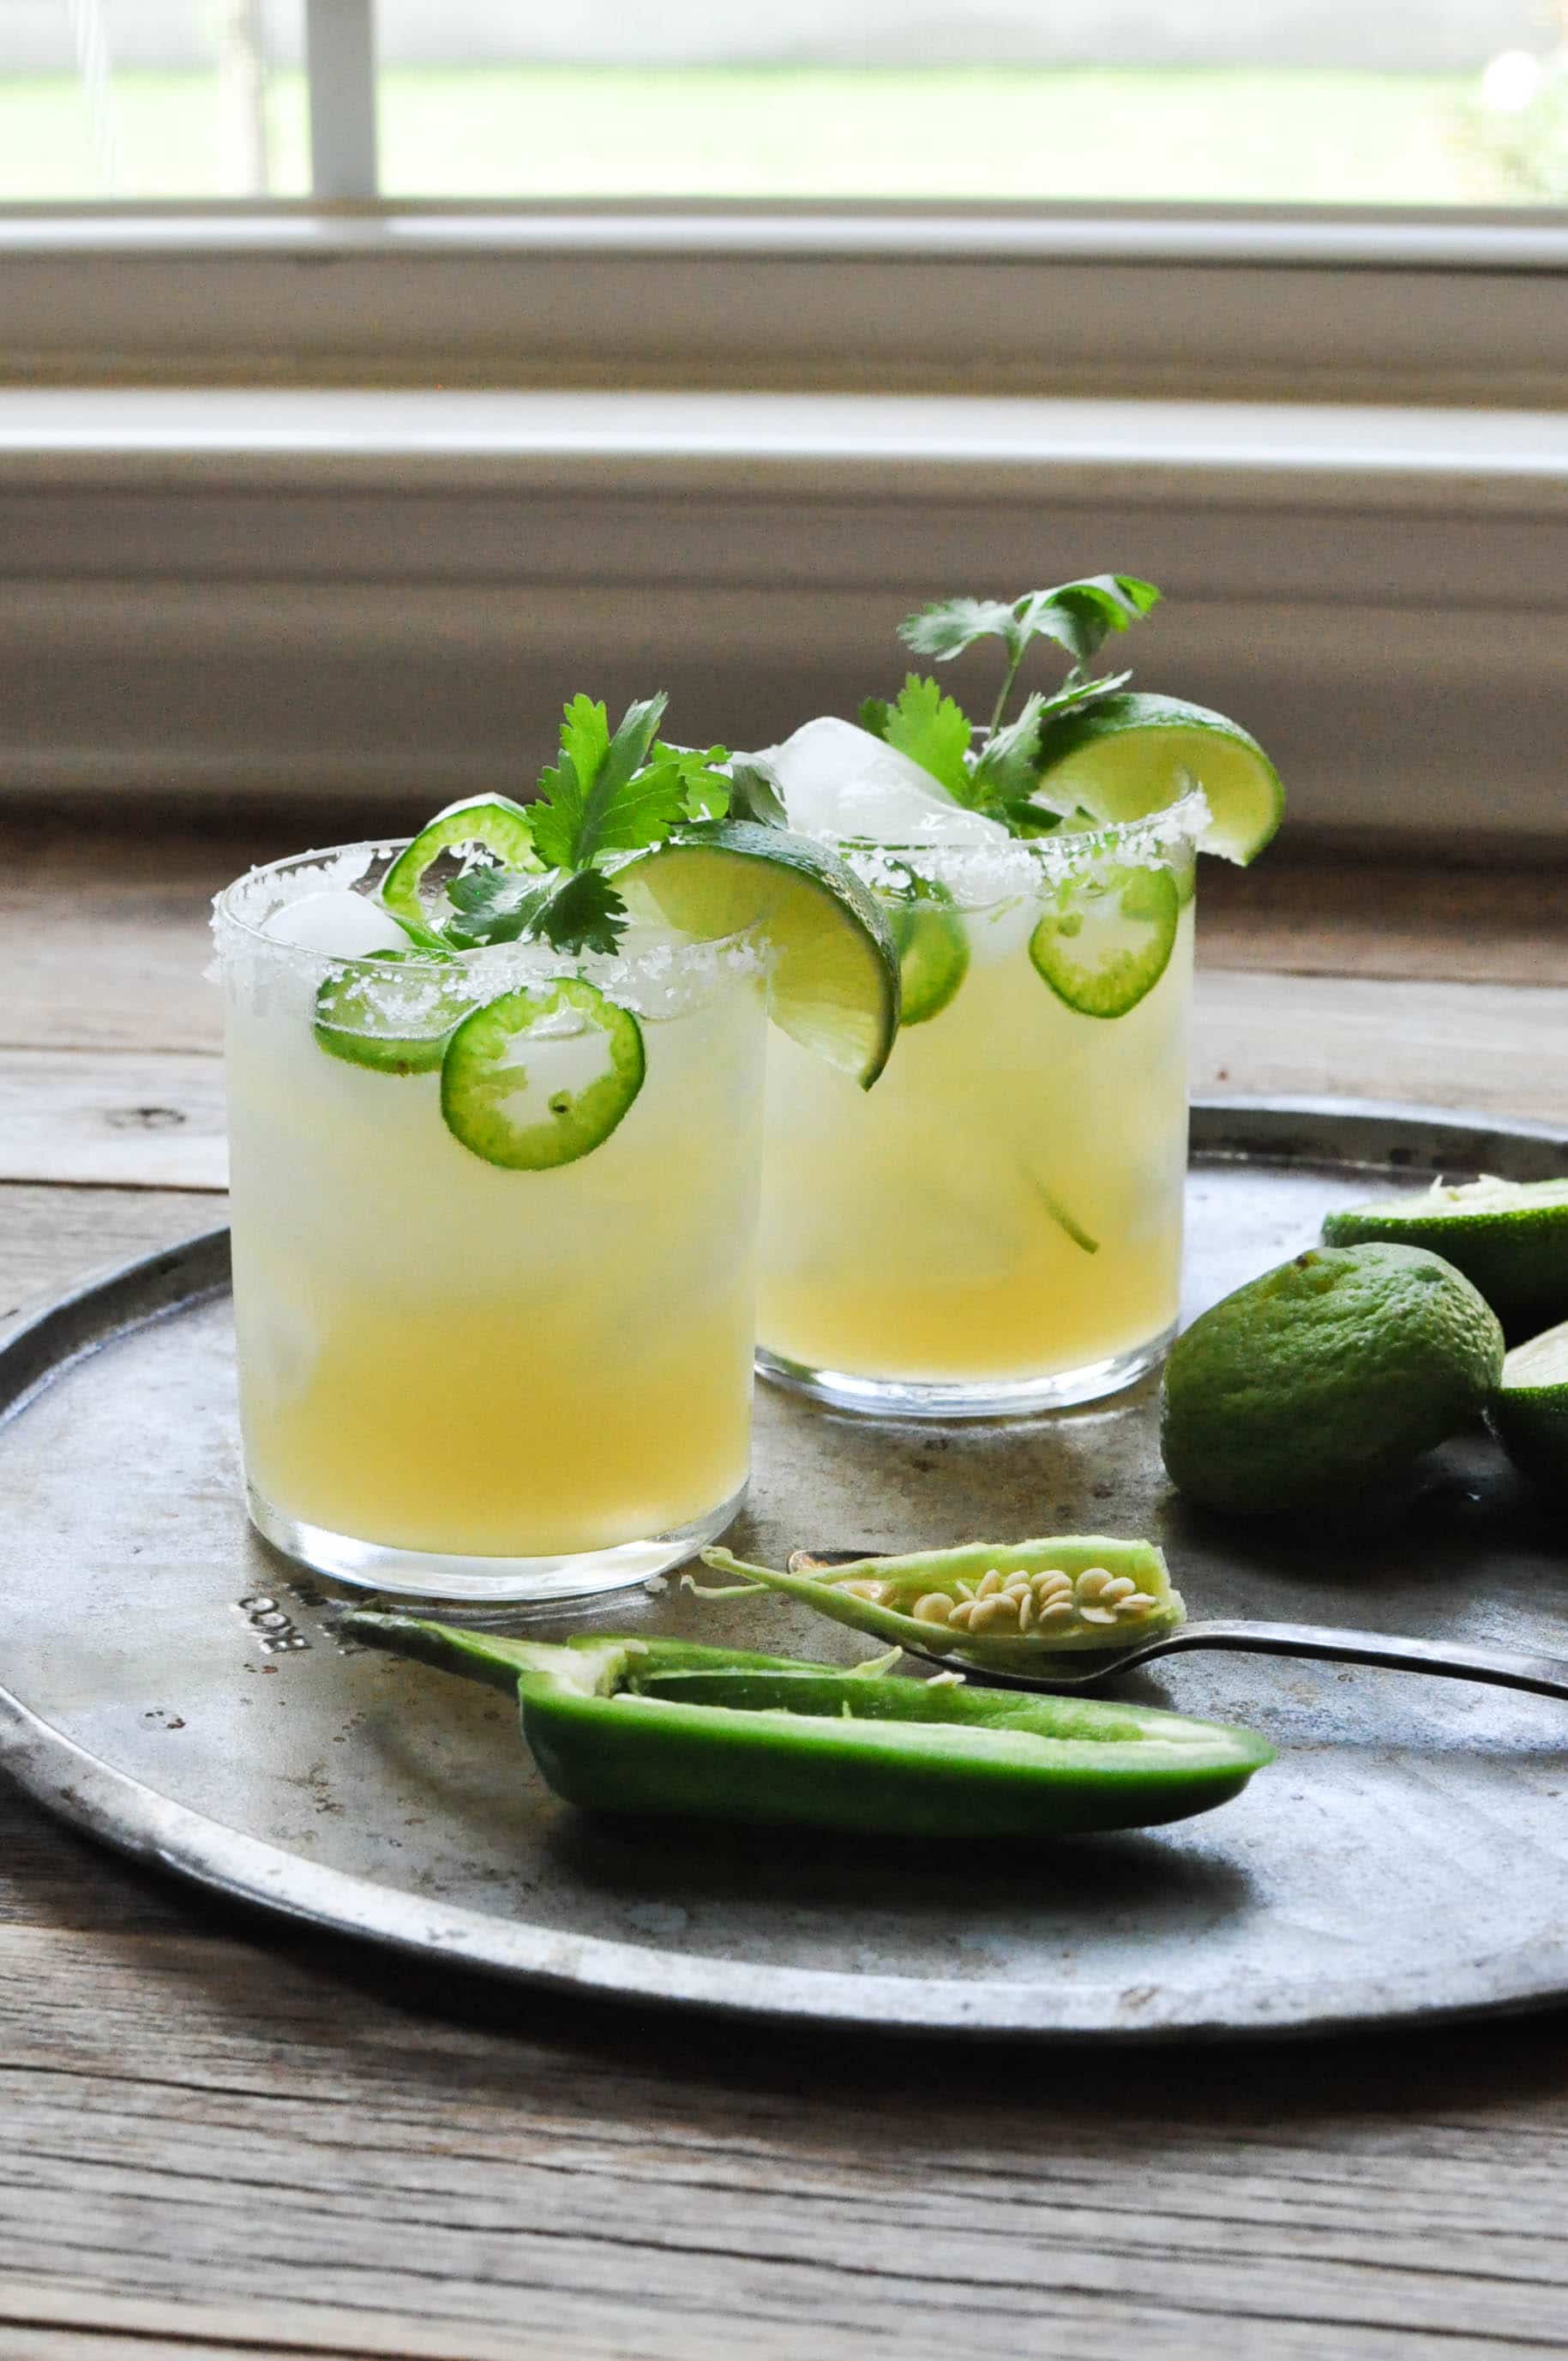 two margarita glasses filled with a fresh jalapeno and lime margaritas and garnished with a salt rim, limes, and cilantro